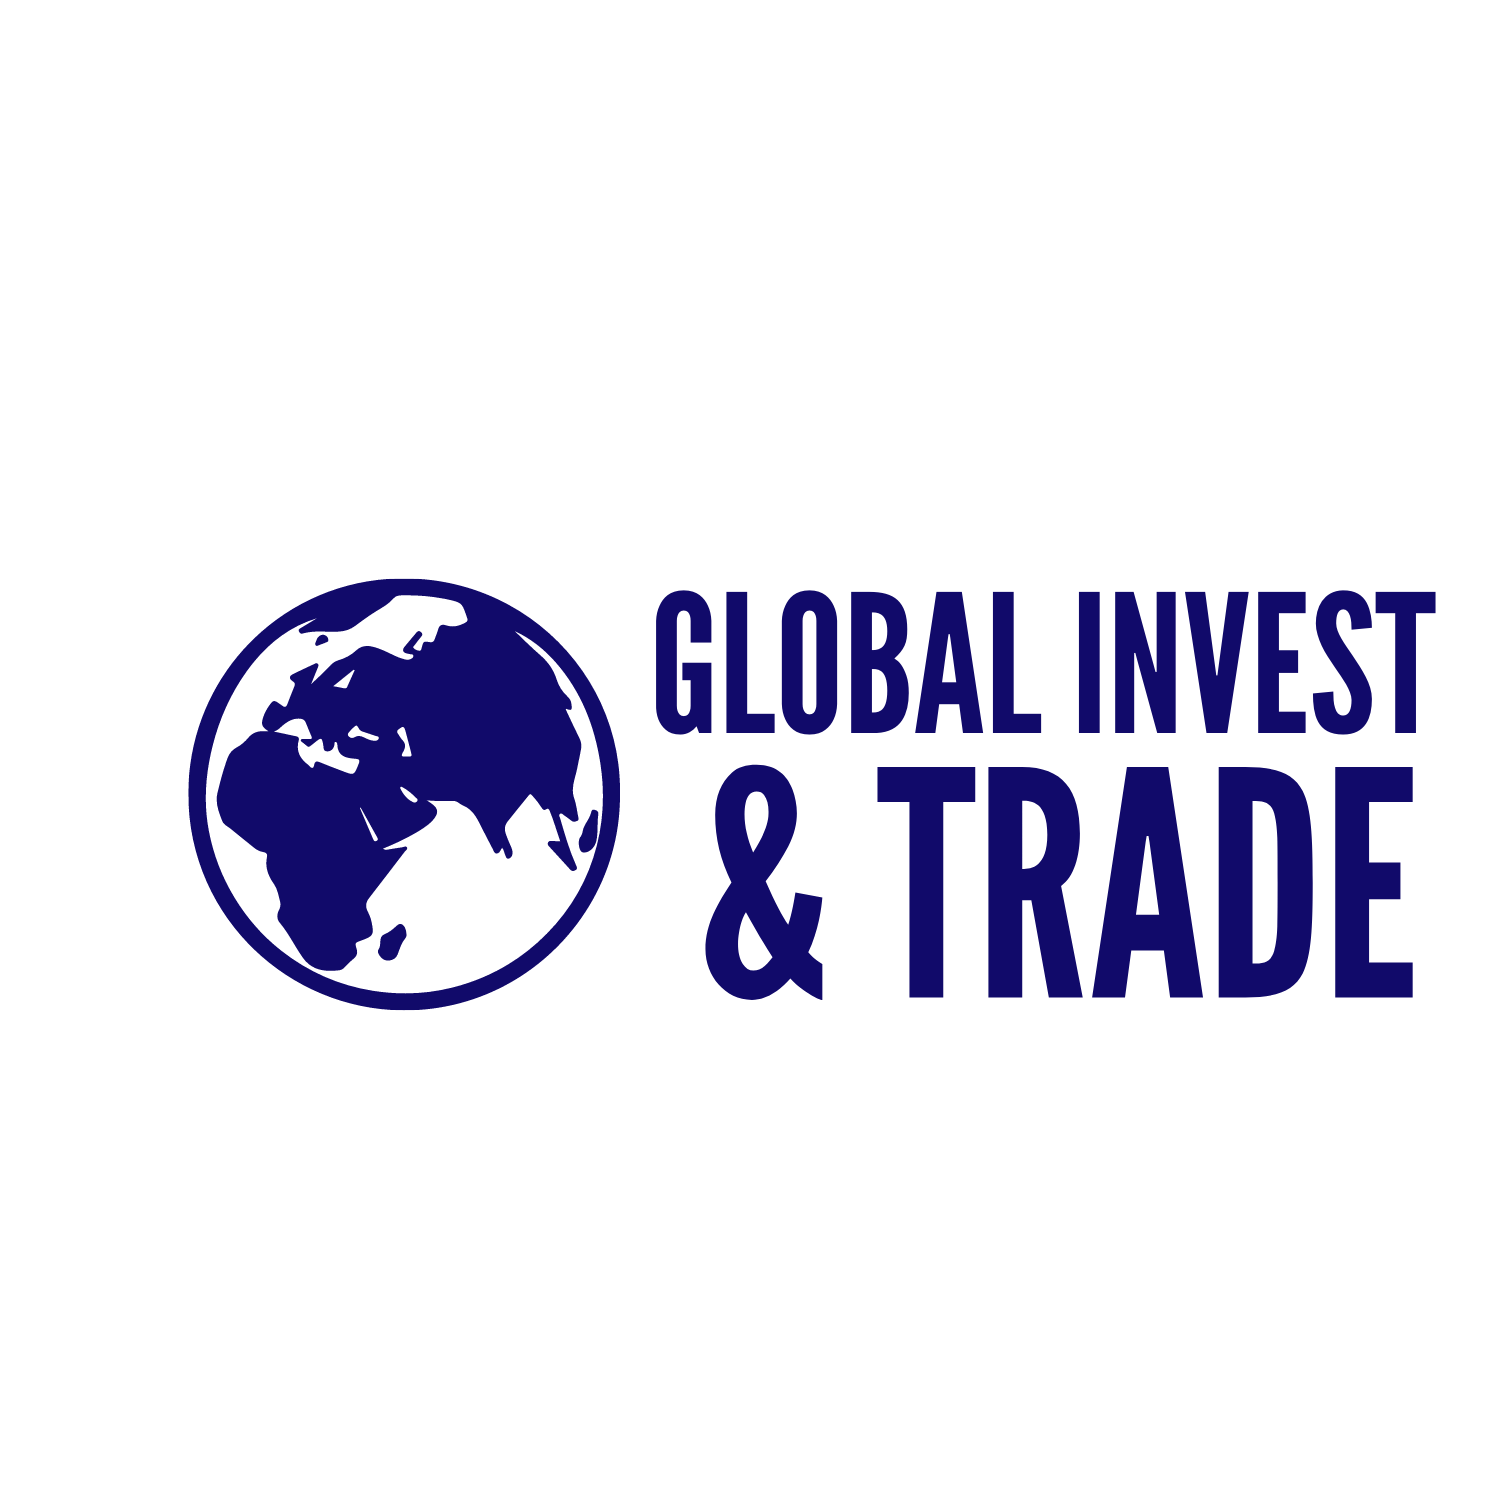 Global Invest & Trade